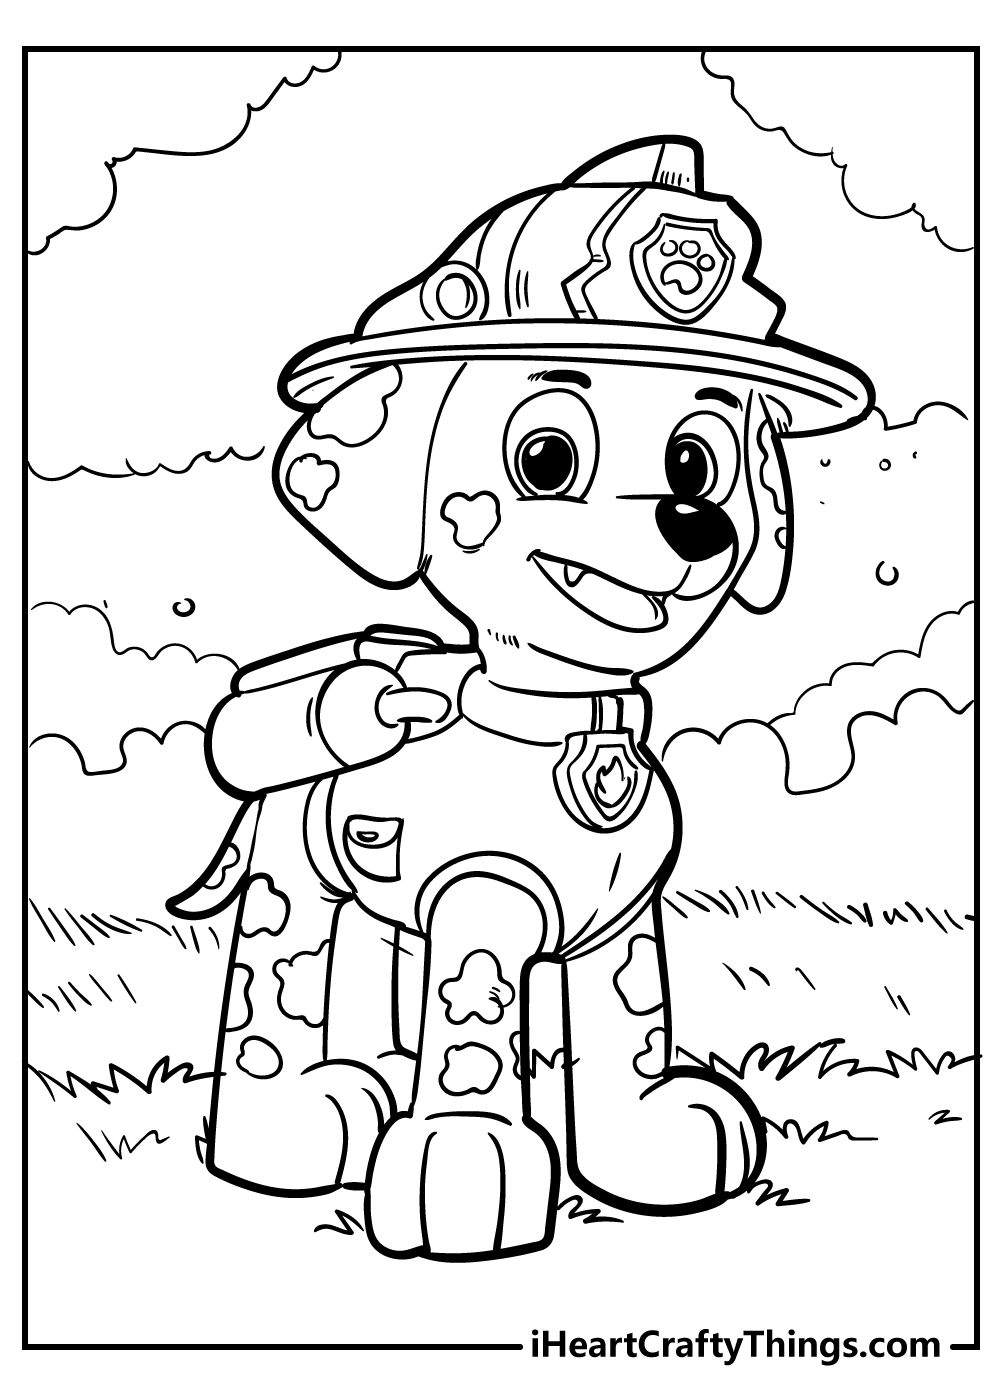 Paw Patrol Coloring Pages FREE Printable 59